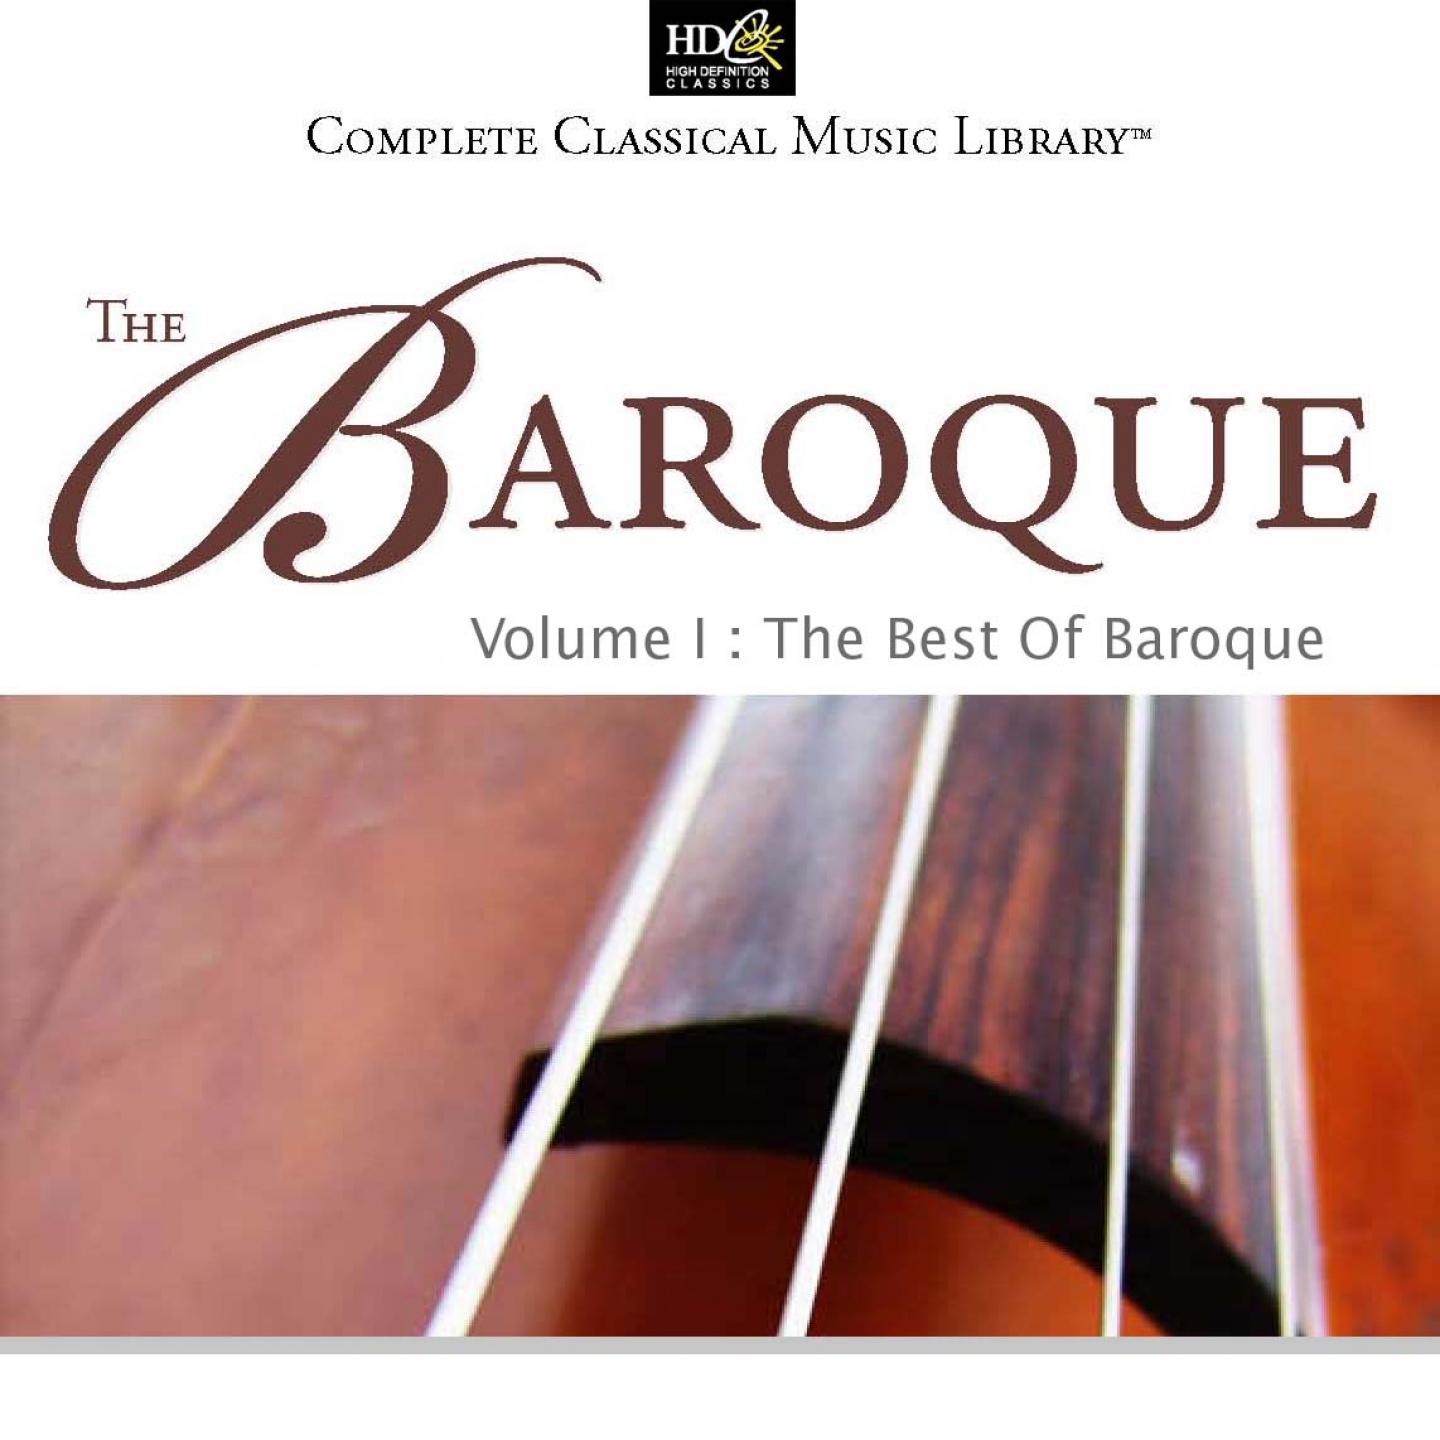 The Baroque Vol. 1: The Best of Baroque: Masters Of Baroque Music